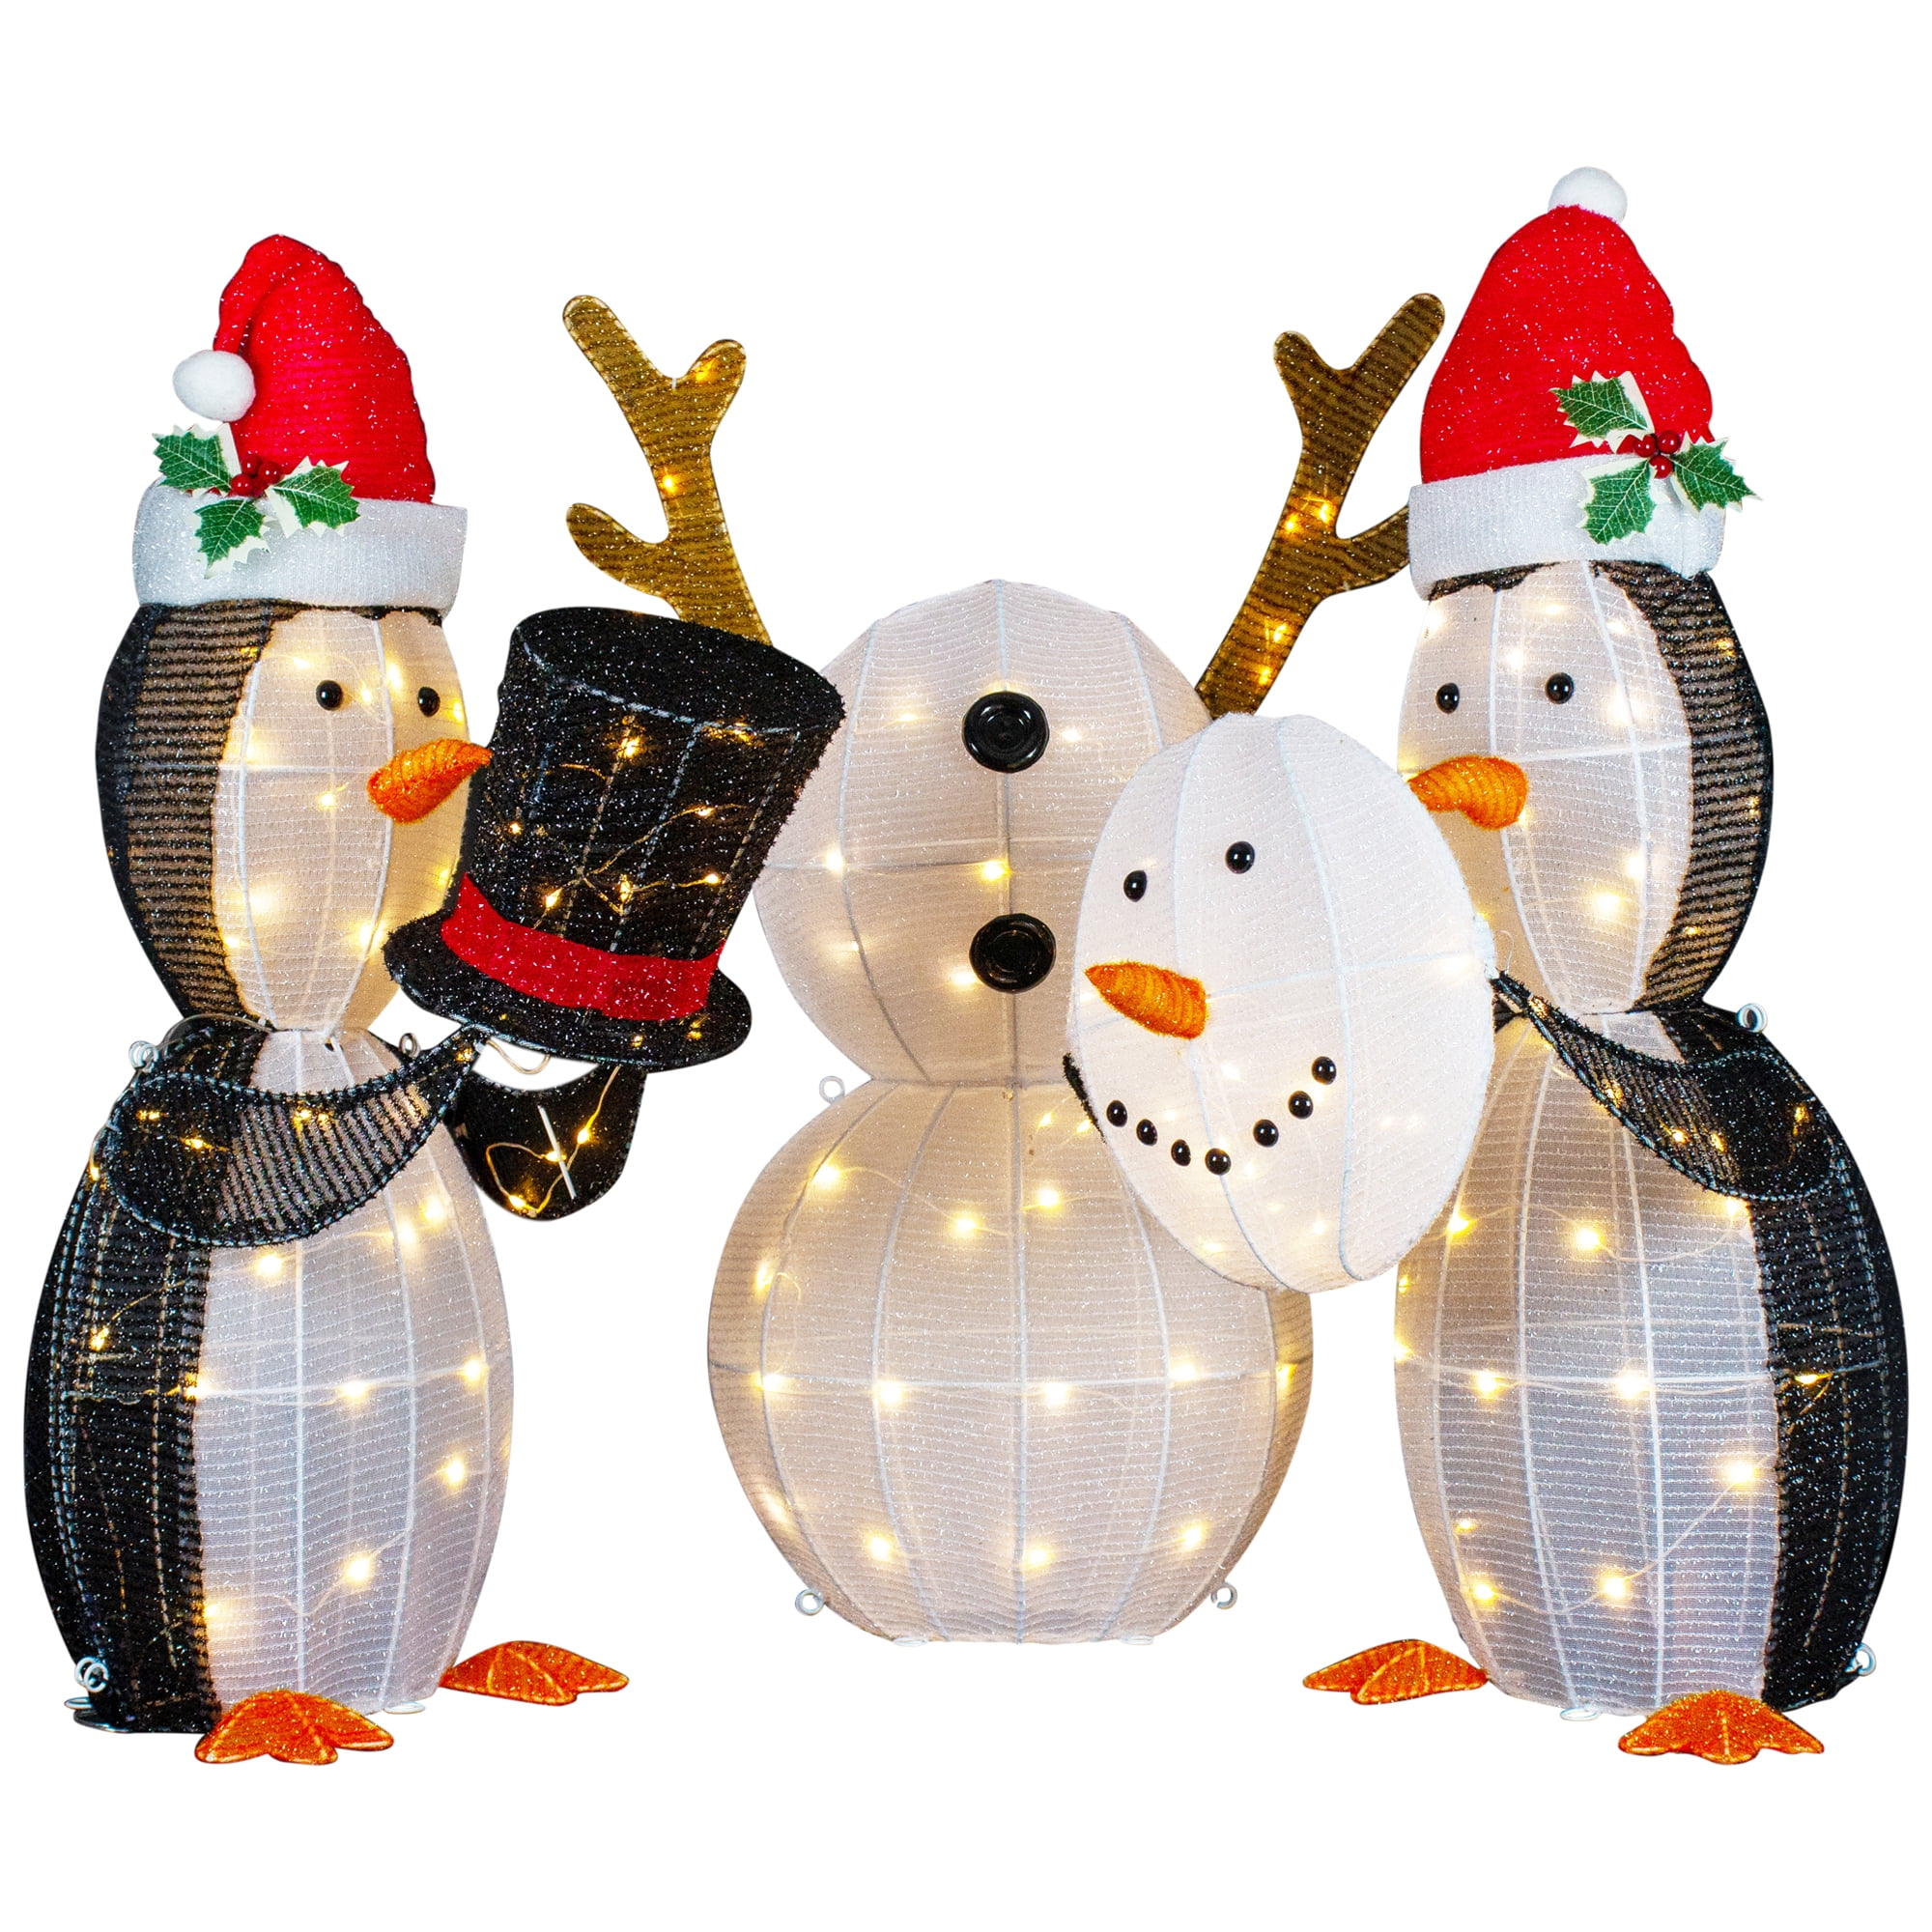 Christmas Decor Penguin and Snowman Flameless Candle Luminaries in Gift Boxes 